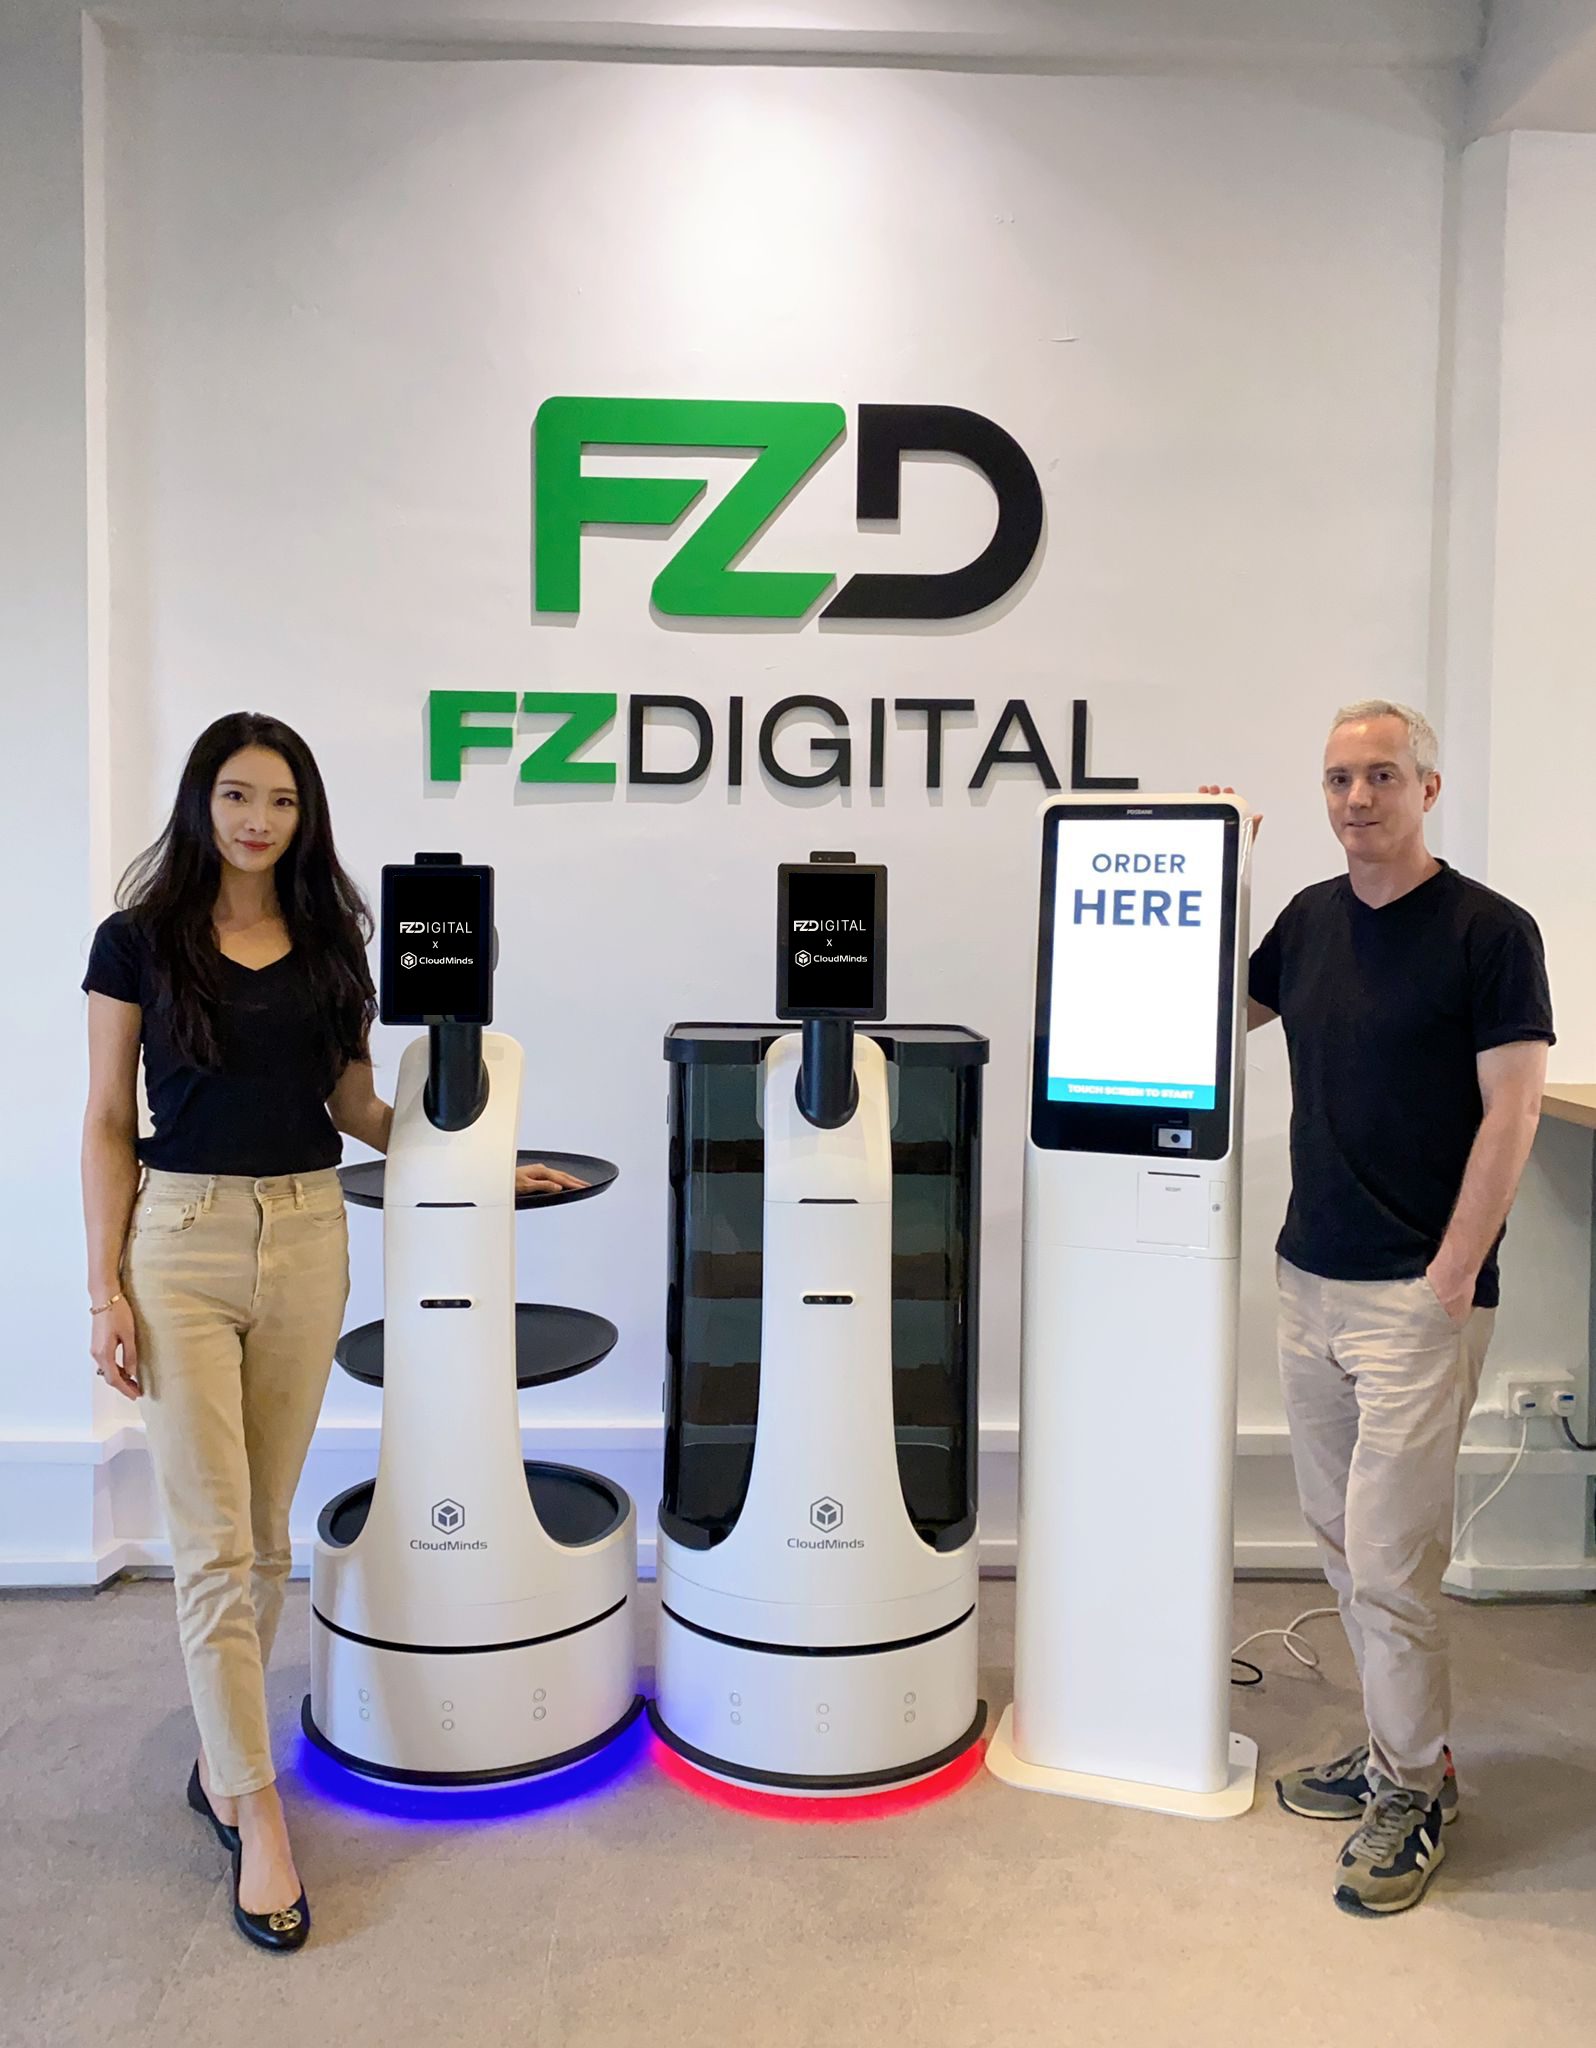 L to R: Chelsea Chan (Managing Director) and Chris Tarr (Chief Product Officer) of FZ Digital